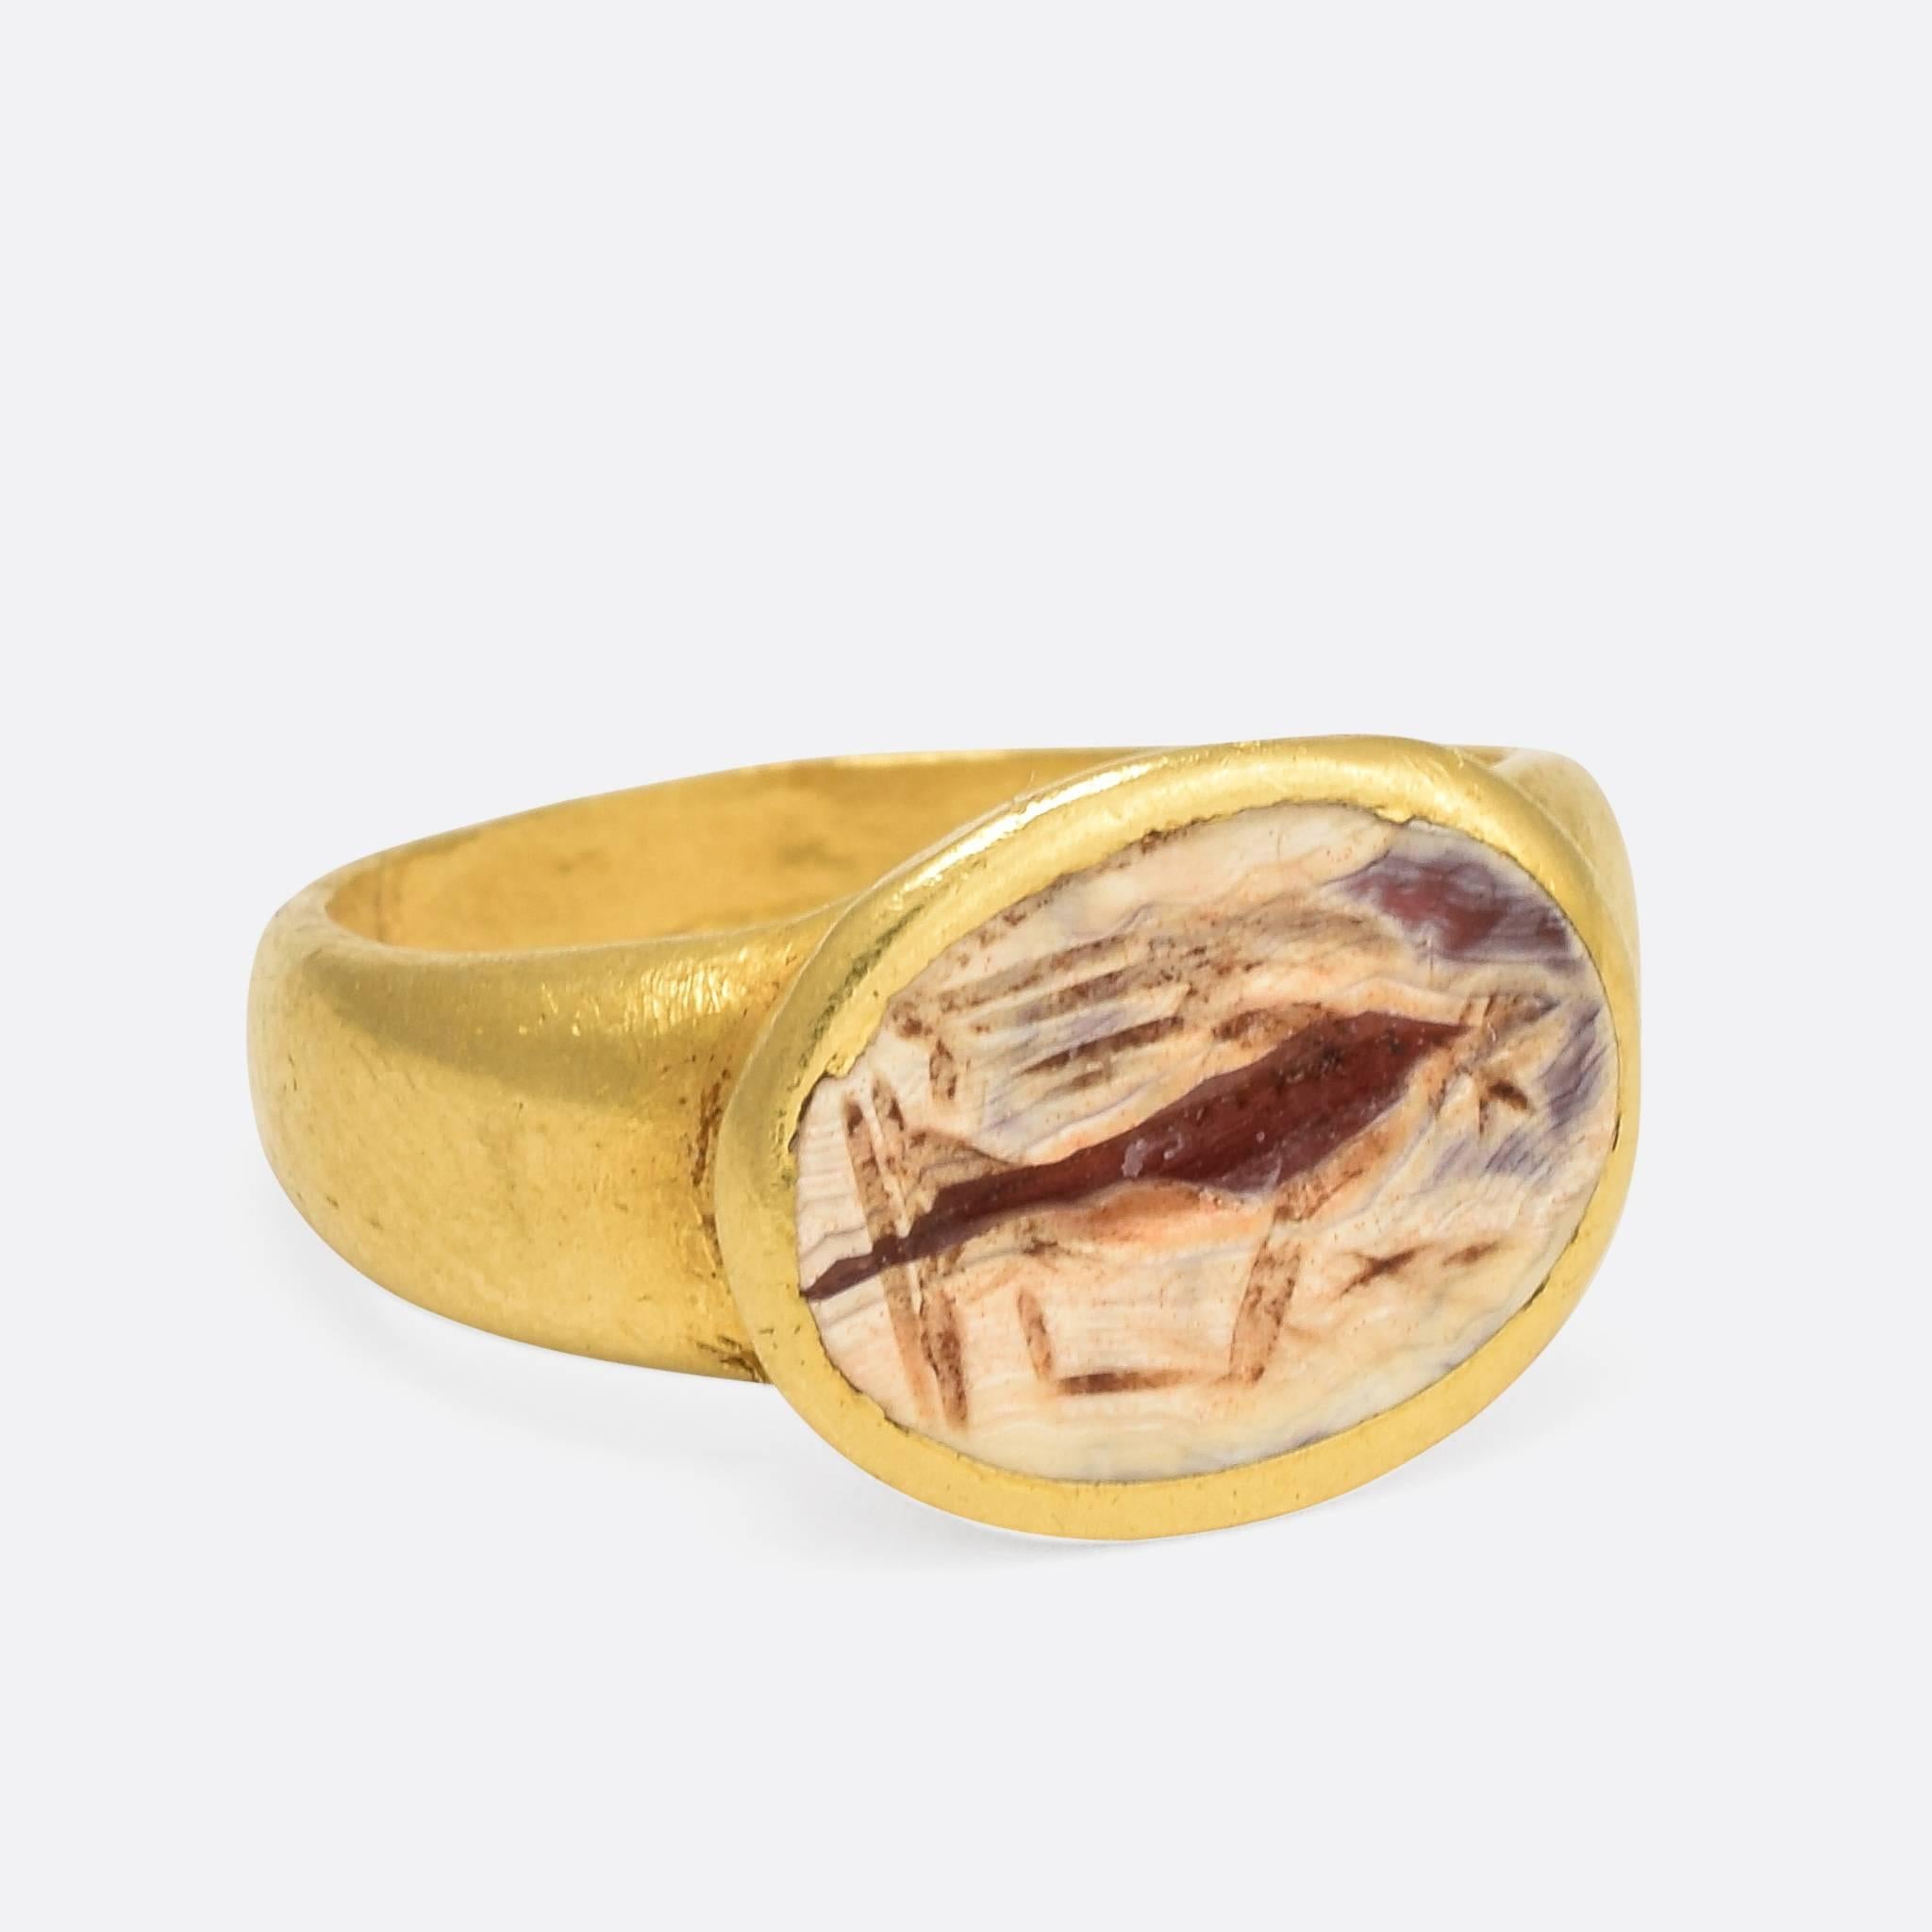 This incredible ring was made around 1800 years ago. The agate panel is carved with an intaglio depicting the Roman Goddess Victoria (or Nike in ancient Greek mythology). Victoria was the personified goddess of victory, and was a major part of Roman